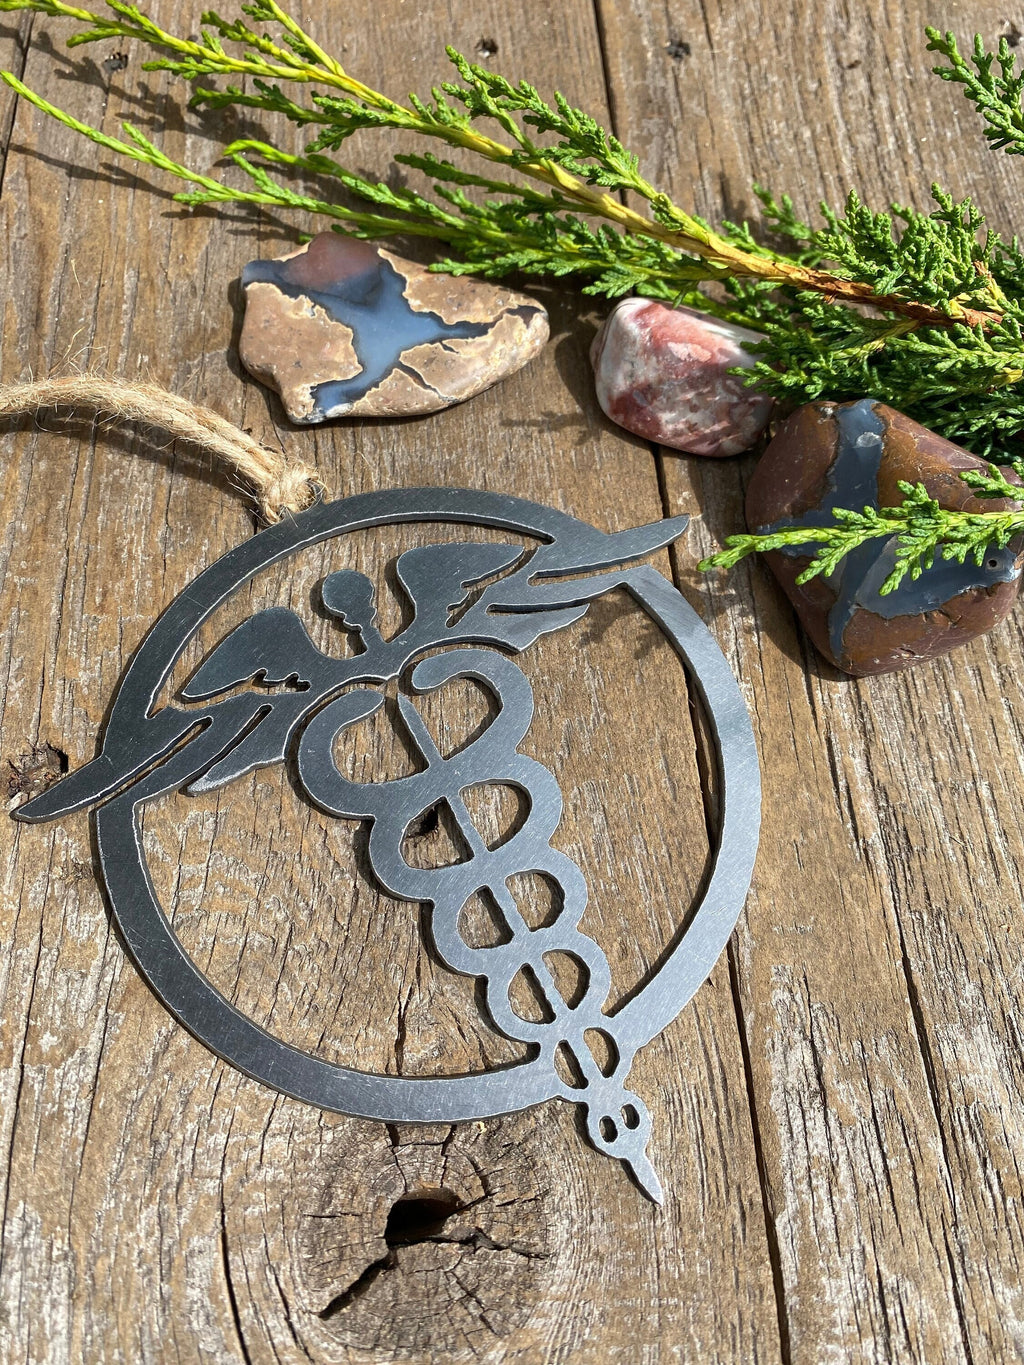 A steel ornament with a stylized design of a nursing emblem, featuring a serpent entwined rod, displayed on a rustic wooden background alongside a selection of natural stones and greenery.